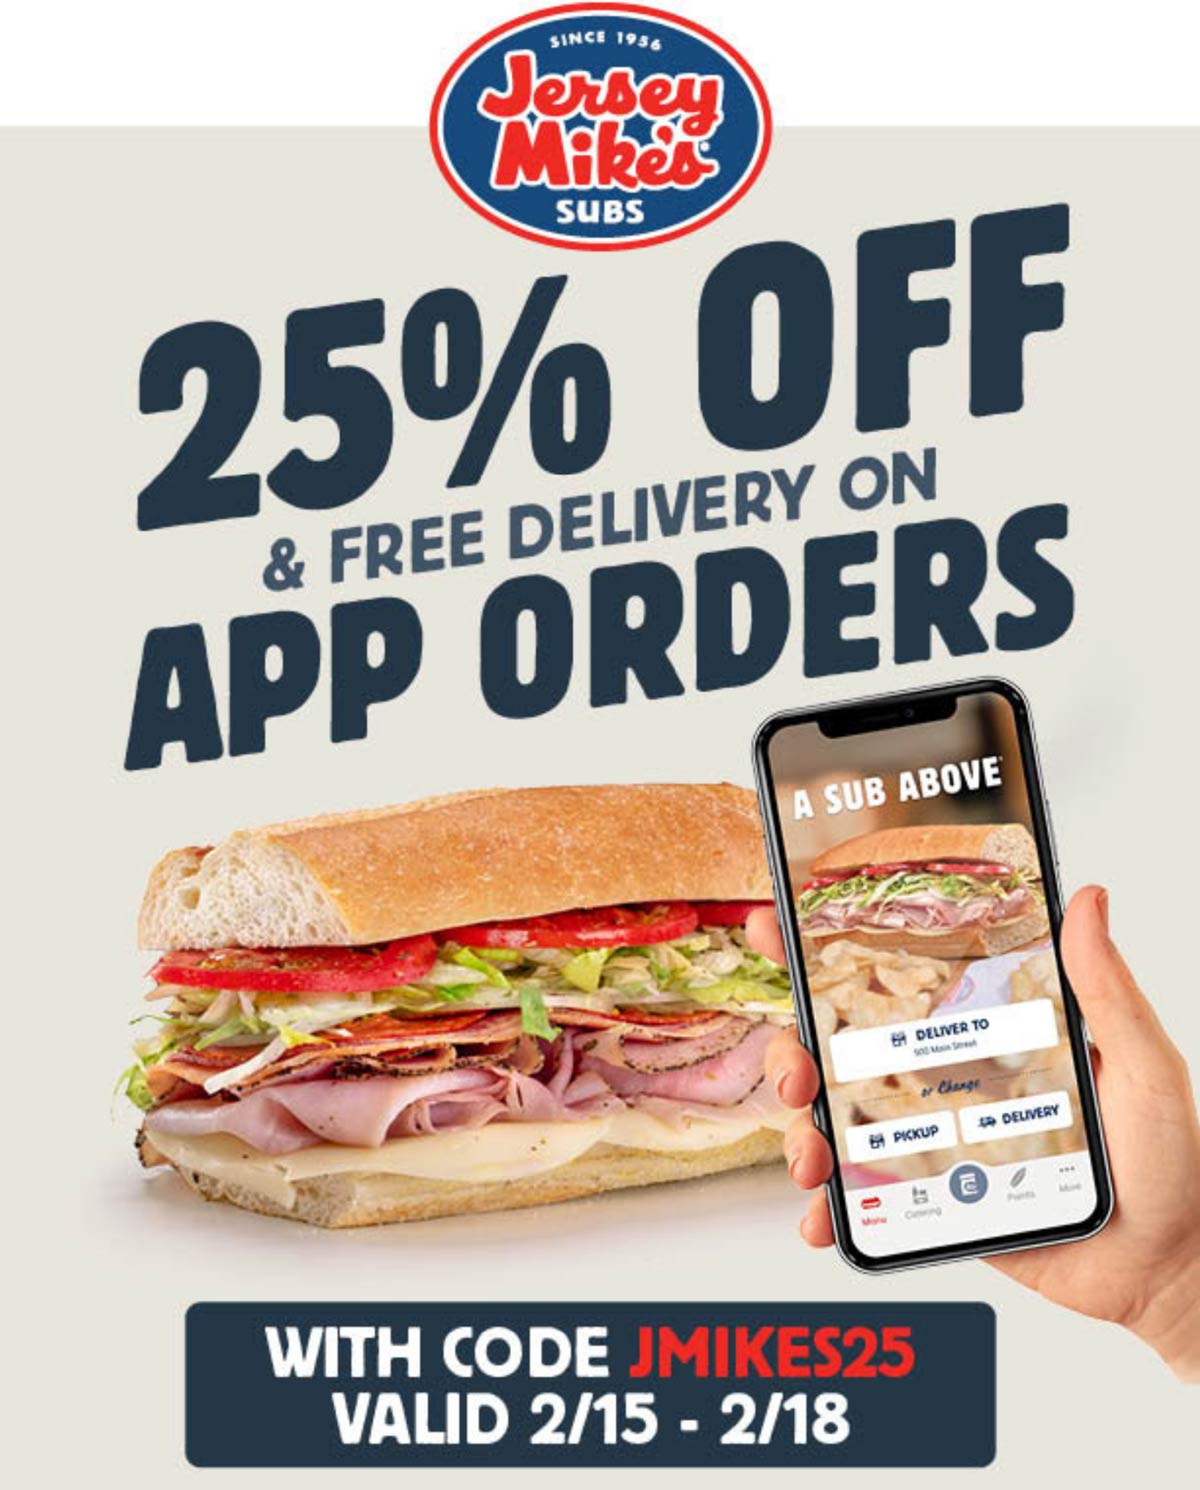 Jersey Mikes stores Coupon  25% off + free delivery at Jersey Mikes via promo code JMIKES25 #jerseymikes 